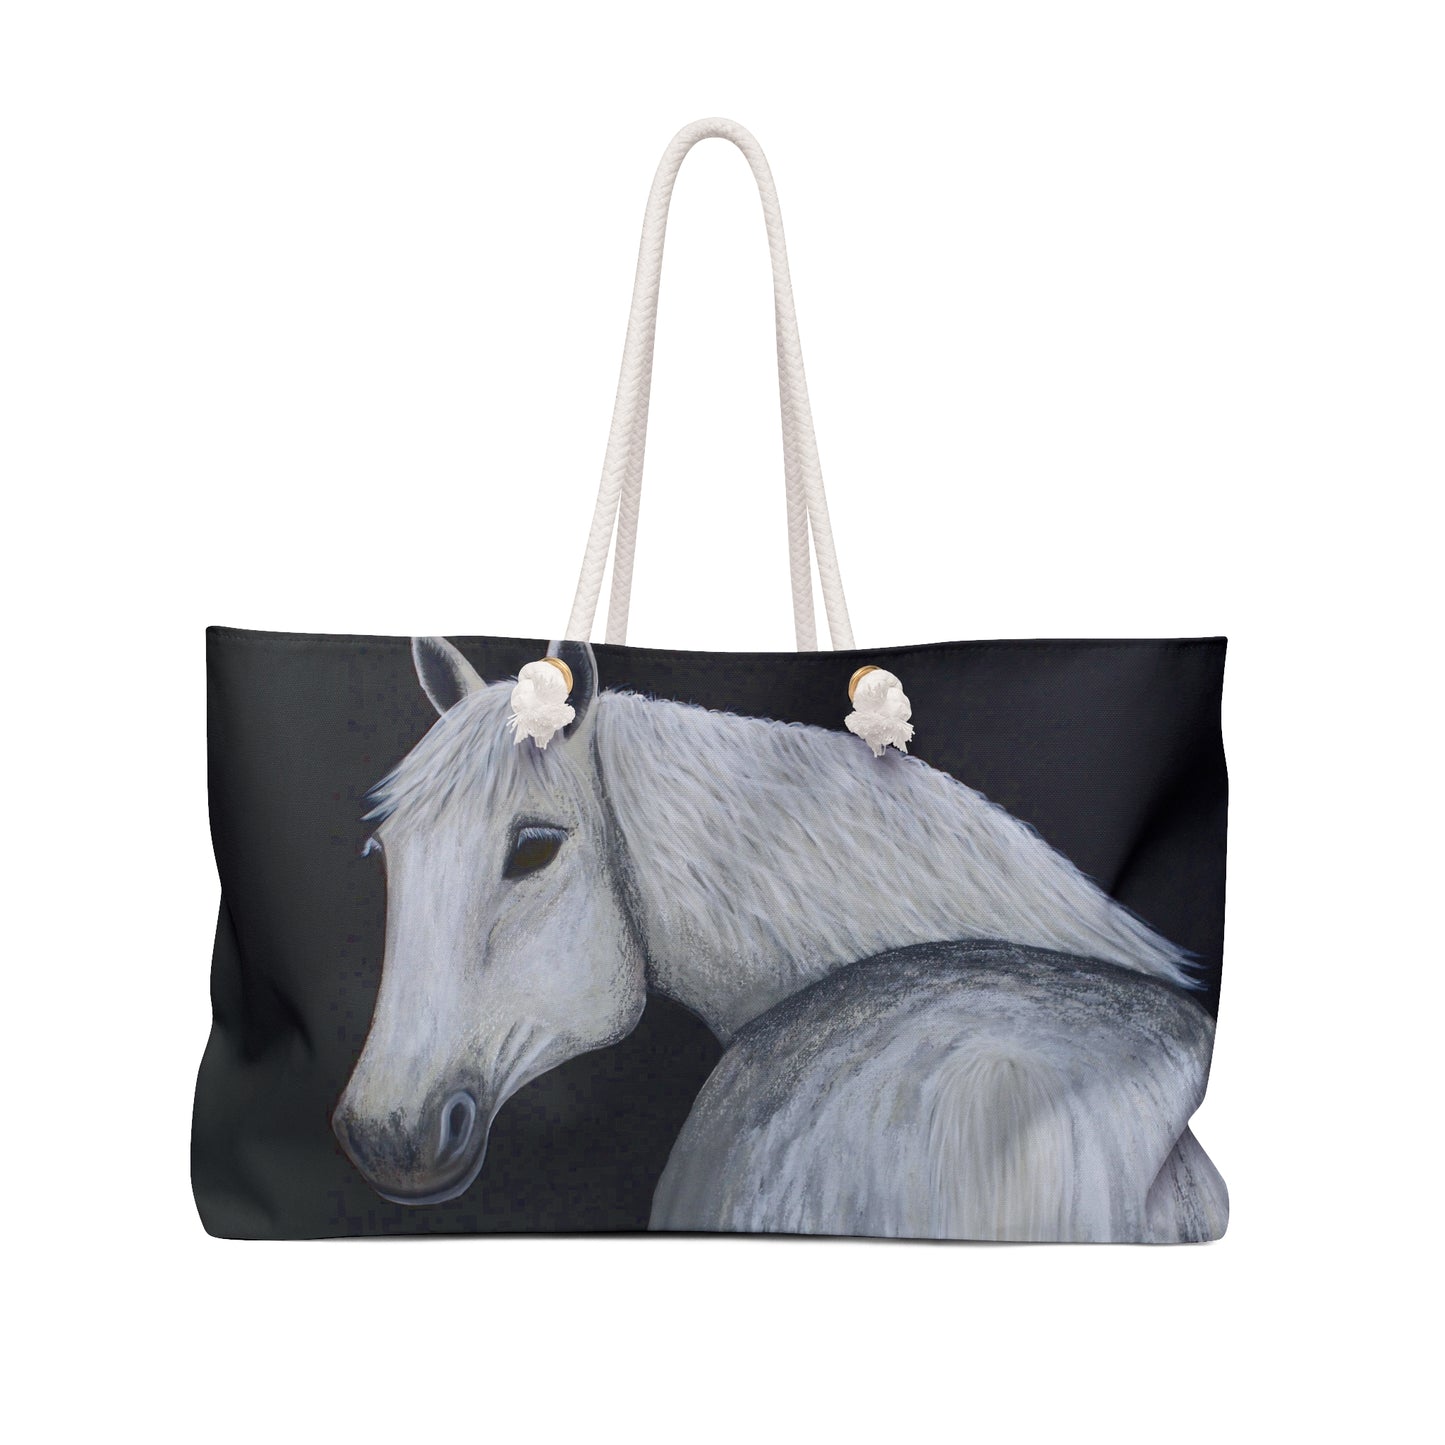 Equestrian Tote Bag - Ghost - Canvas Tote bag - Large Tote